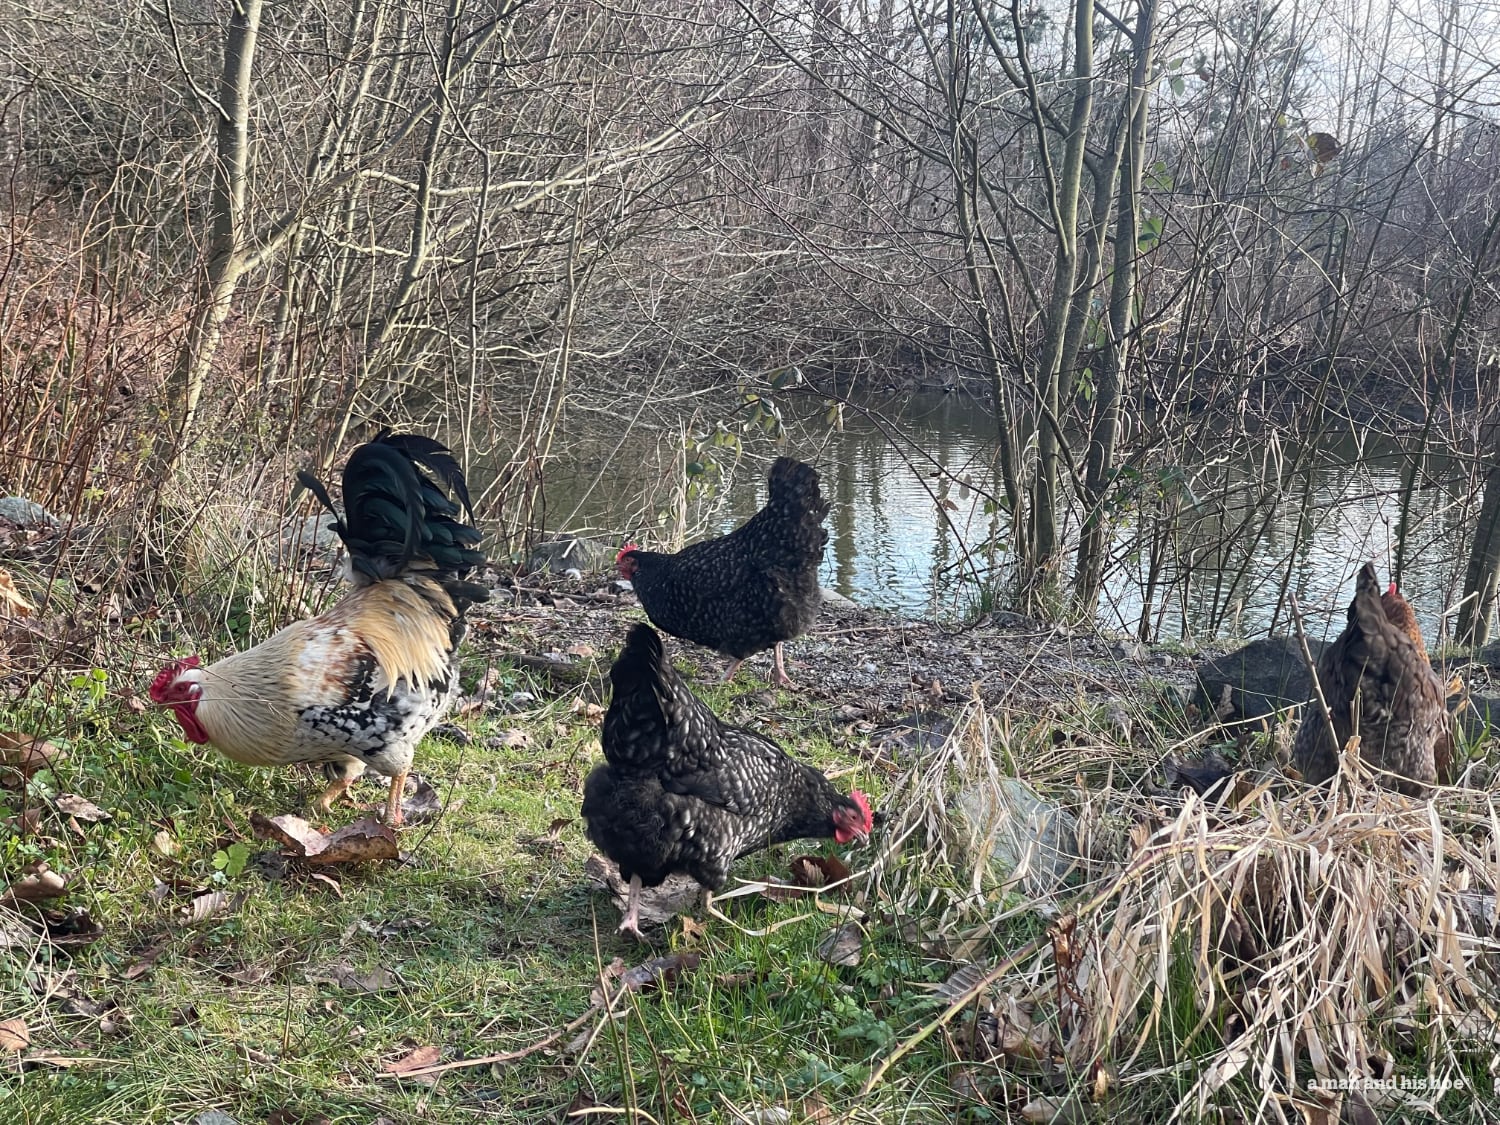 Chickens out pecking through the grass and leaves by the pond.